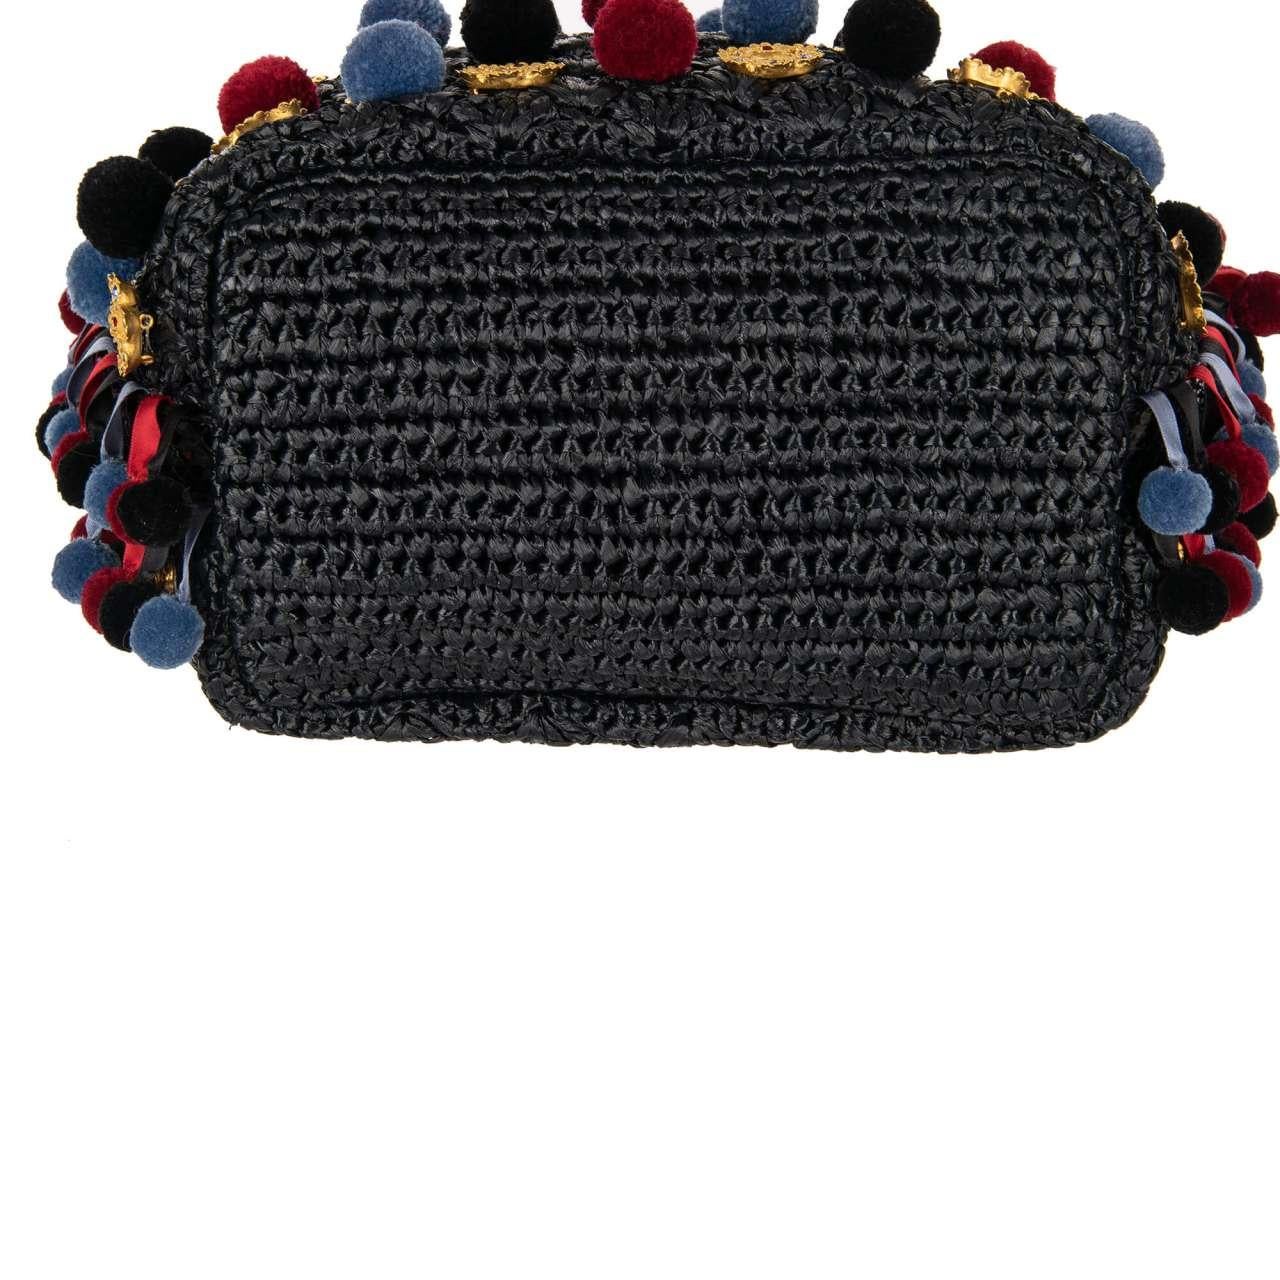 Dolce & Gabbana - Raffia Bucket Bag CLAUDIA with Pompoms and Crystals Black Red 1